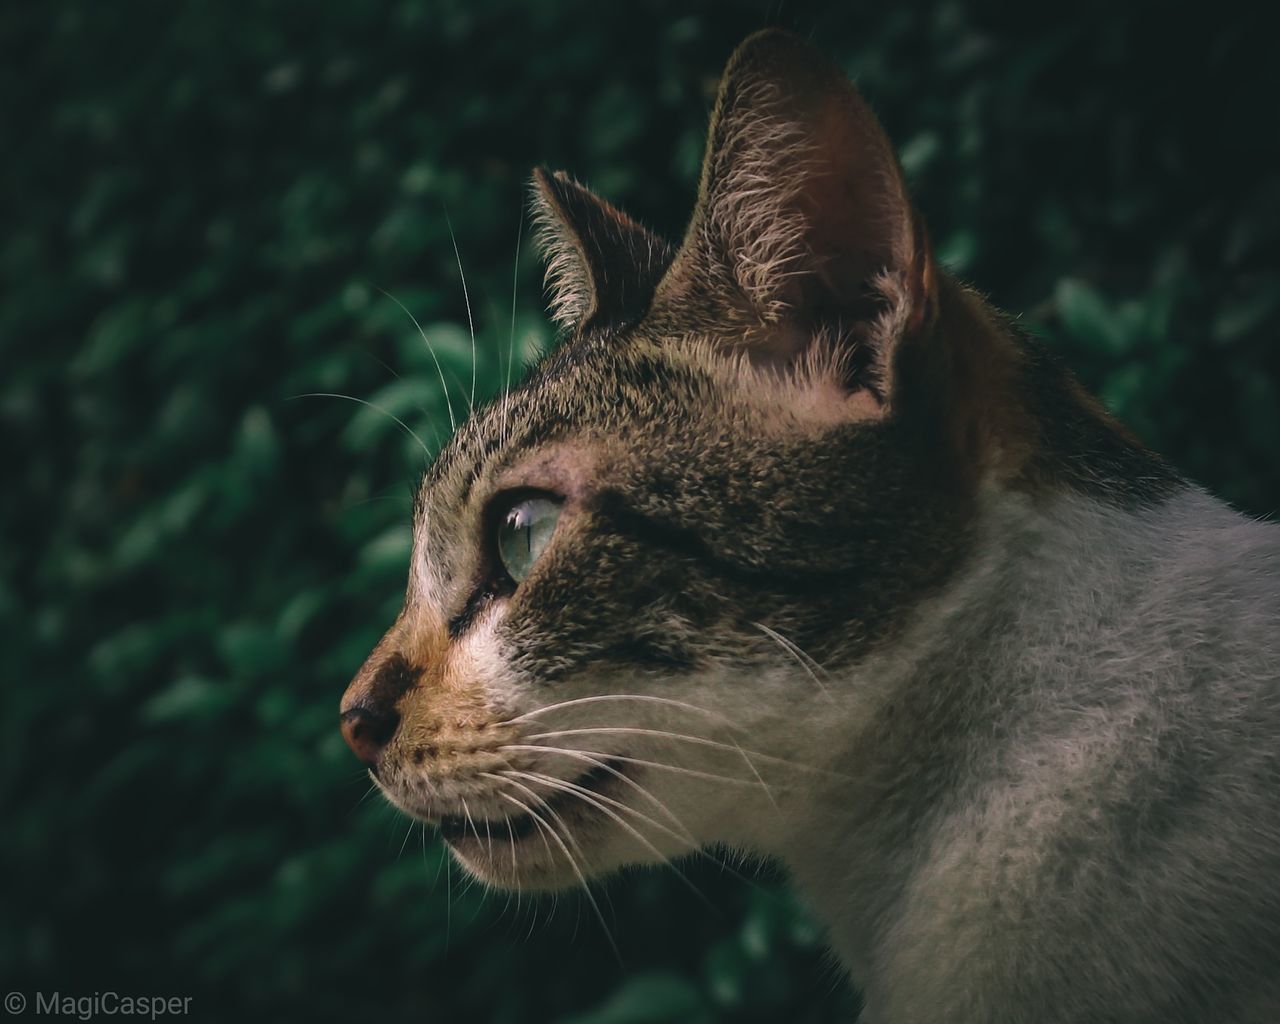 CLOSE-UP OF A CAT LOOKING AWAY OUTDOORS